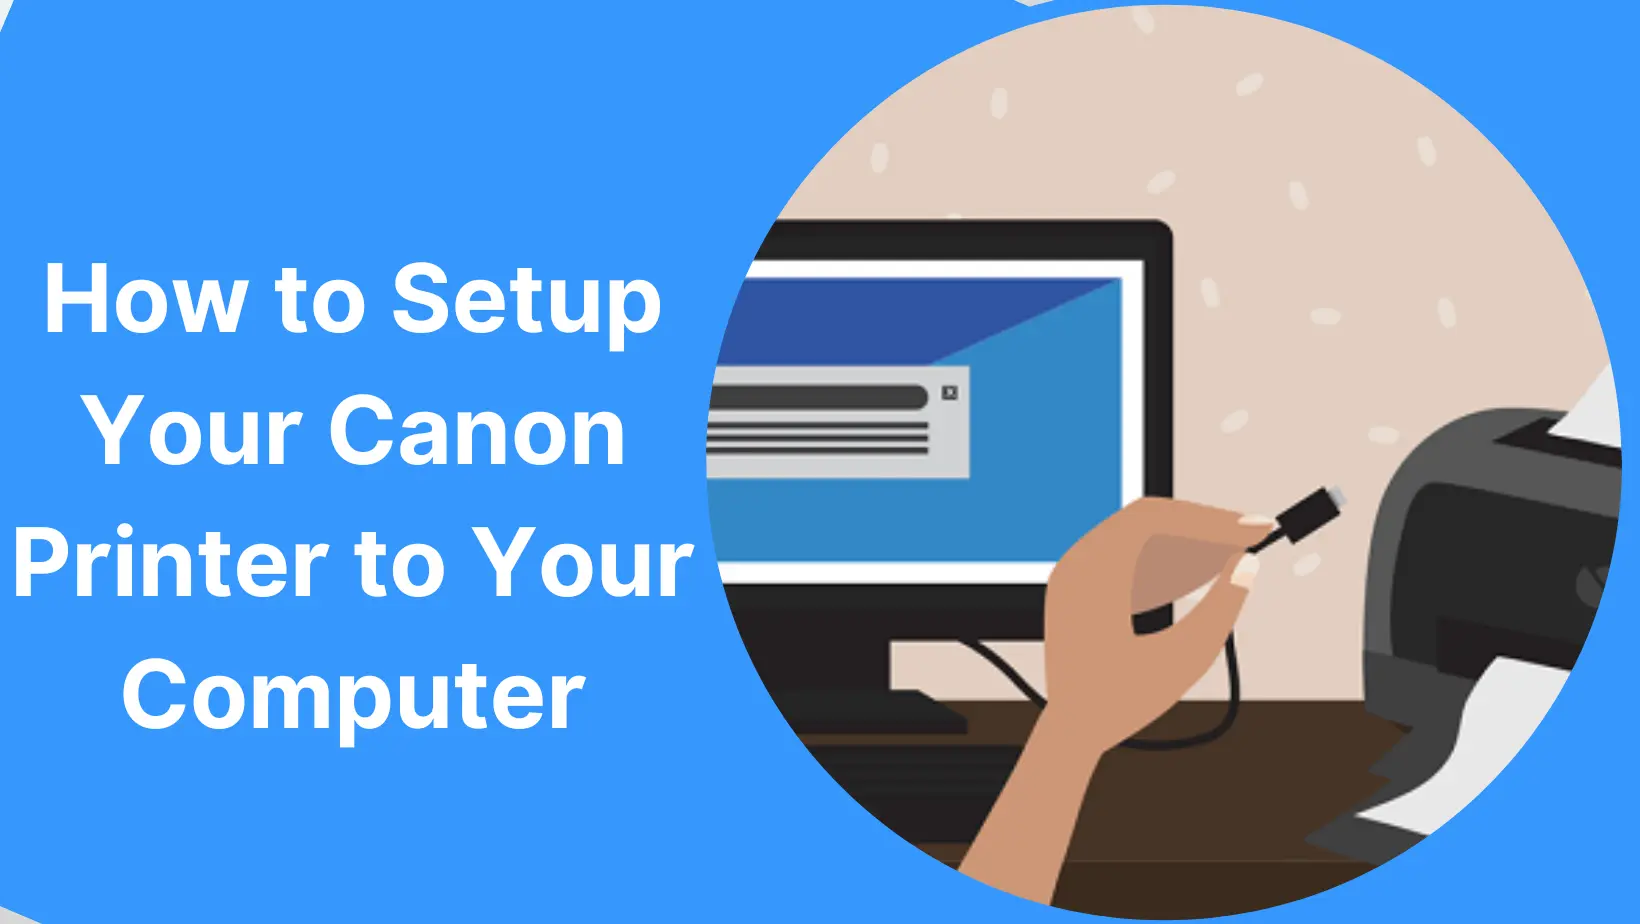 How to Setup Your Canon Printer to Your Computer